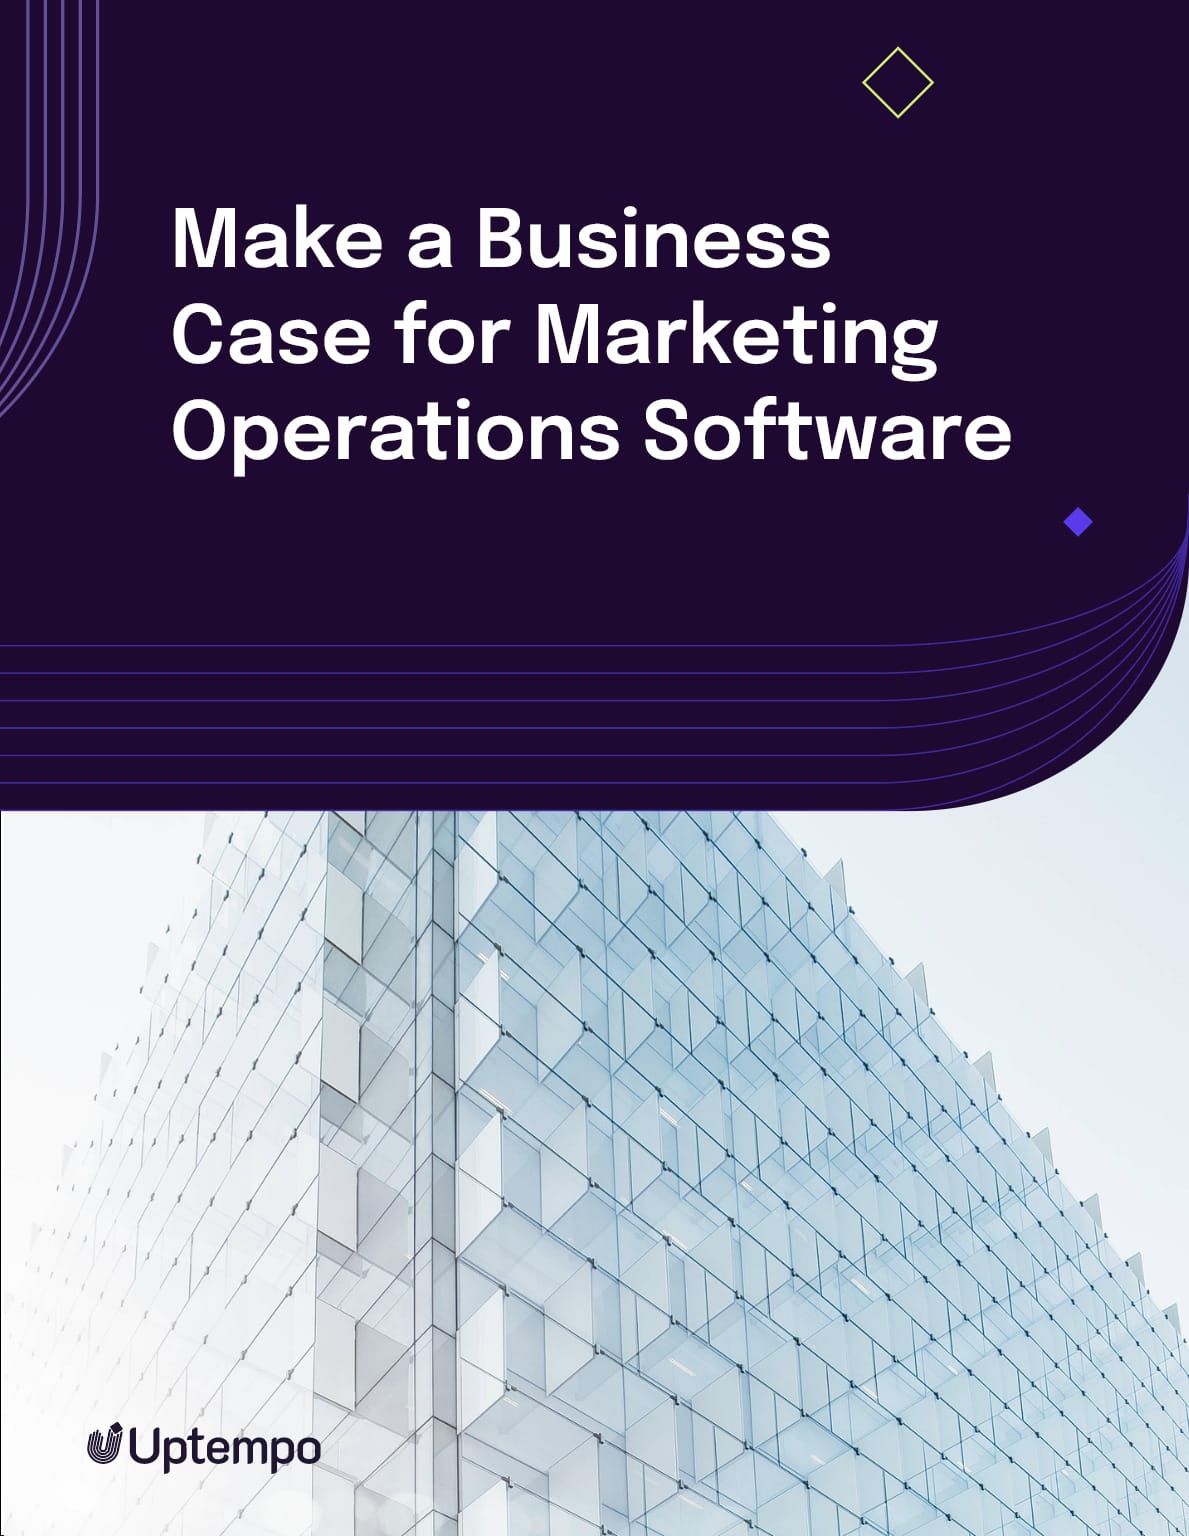 Make a business case for marketing operations software